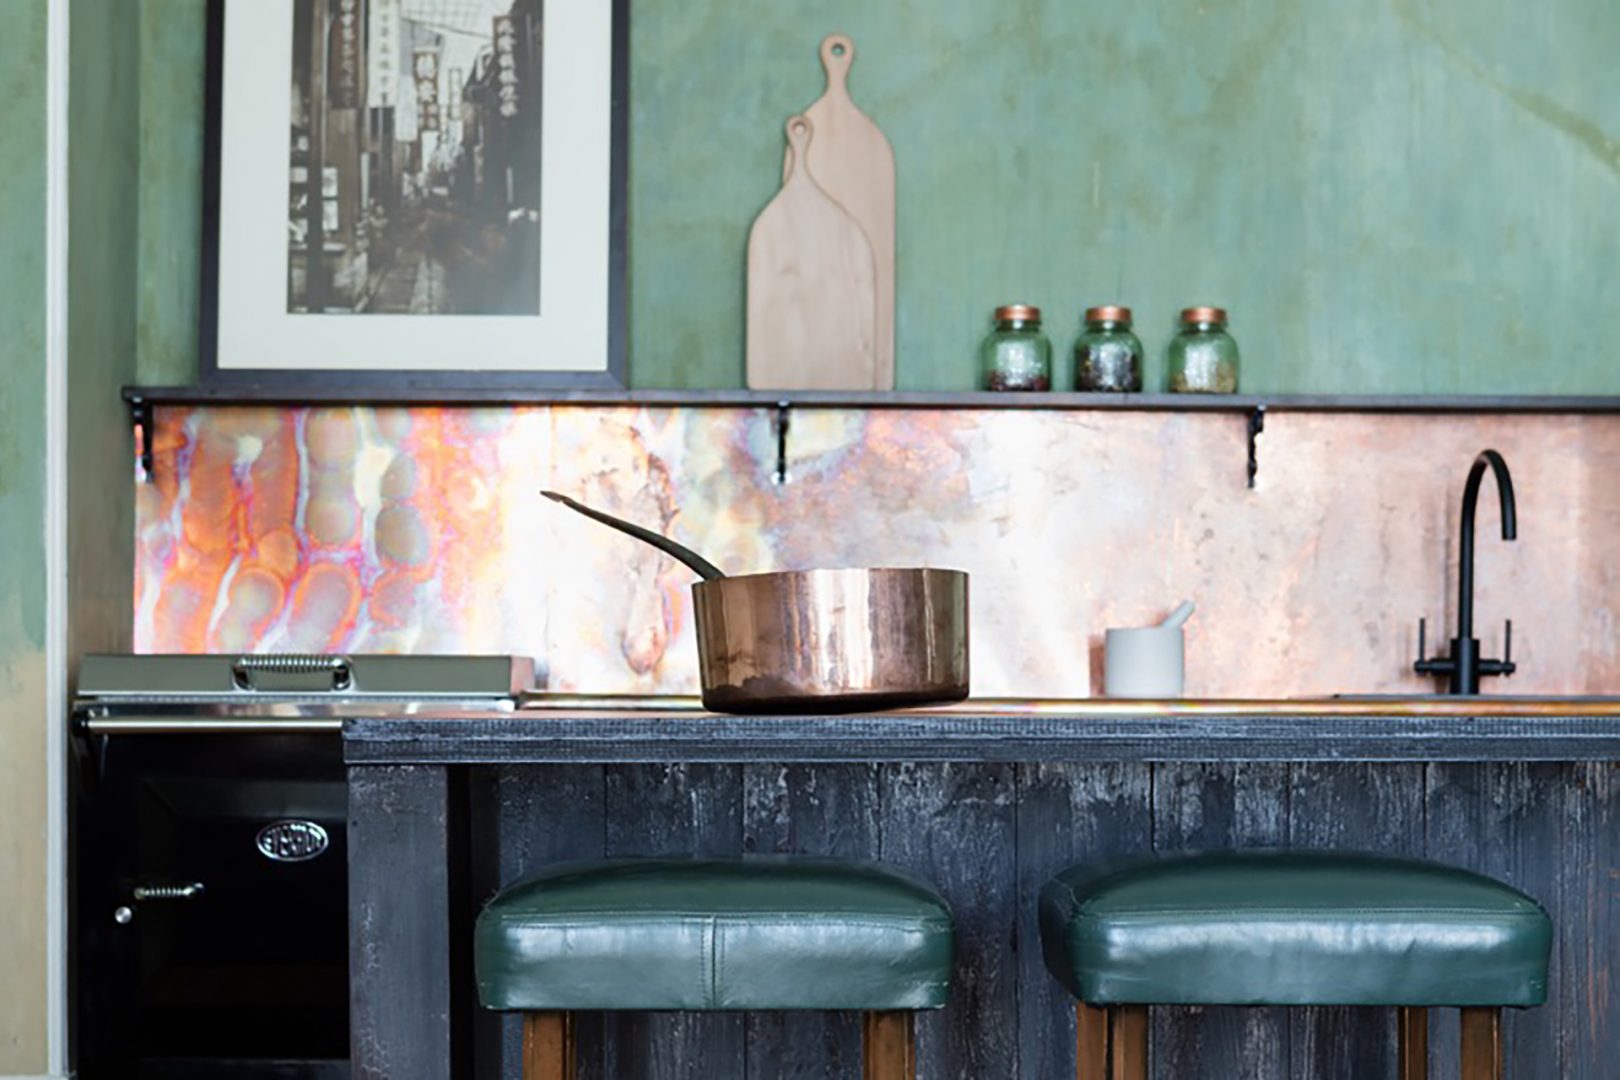 Burnt cedar and copper kitchen with green walls for George Clarke's, Old house New Home